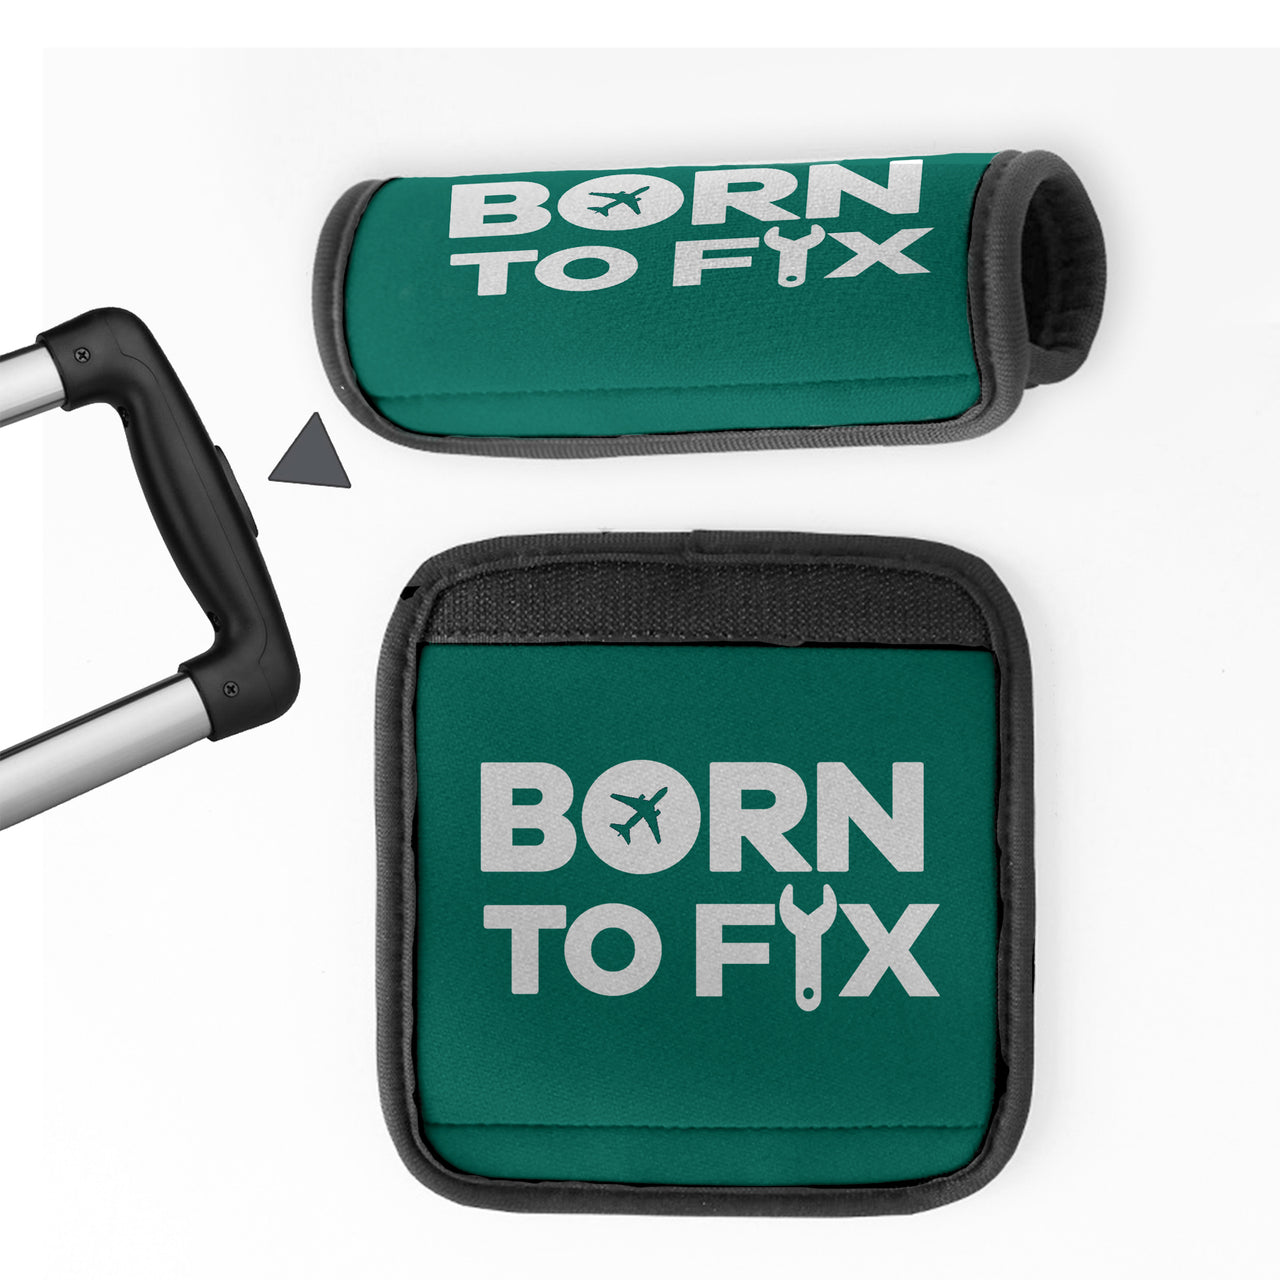 Born To Fix Airplanes Designed Neoprene Luggage Handle Covers